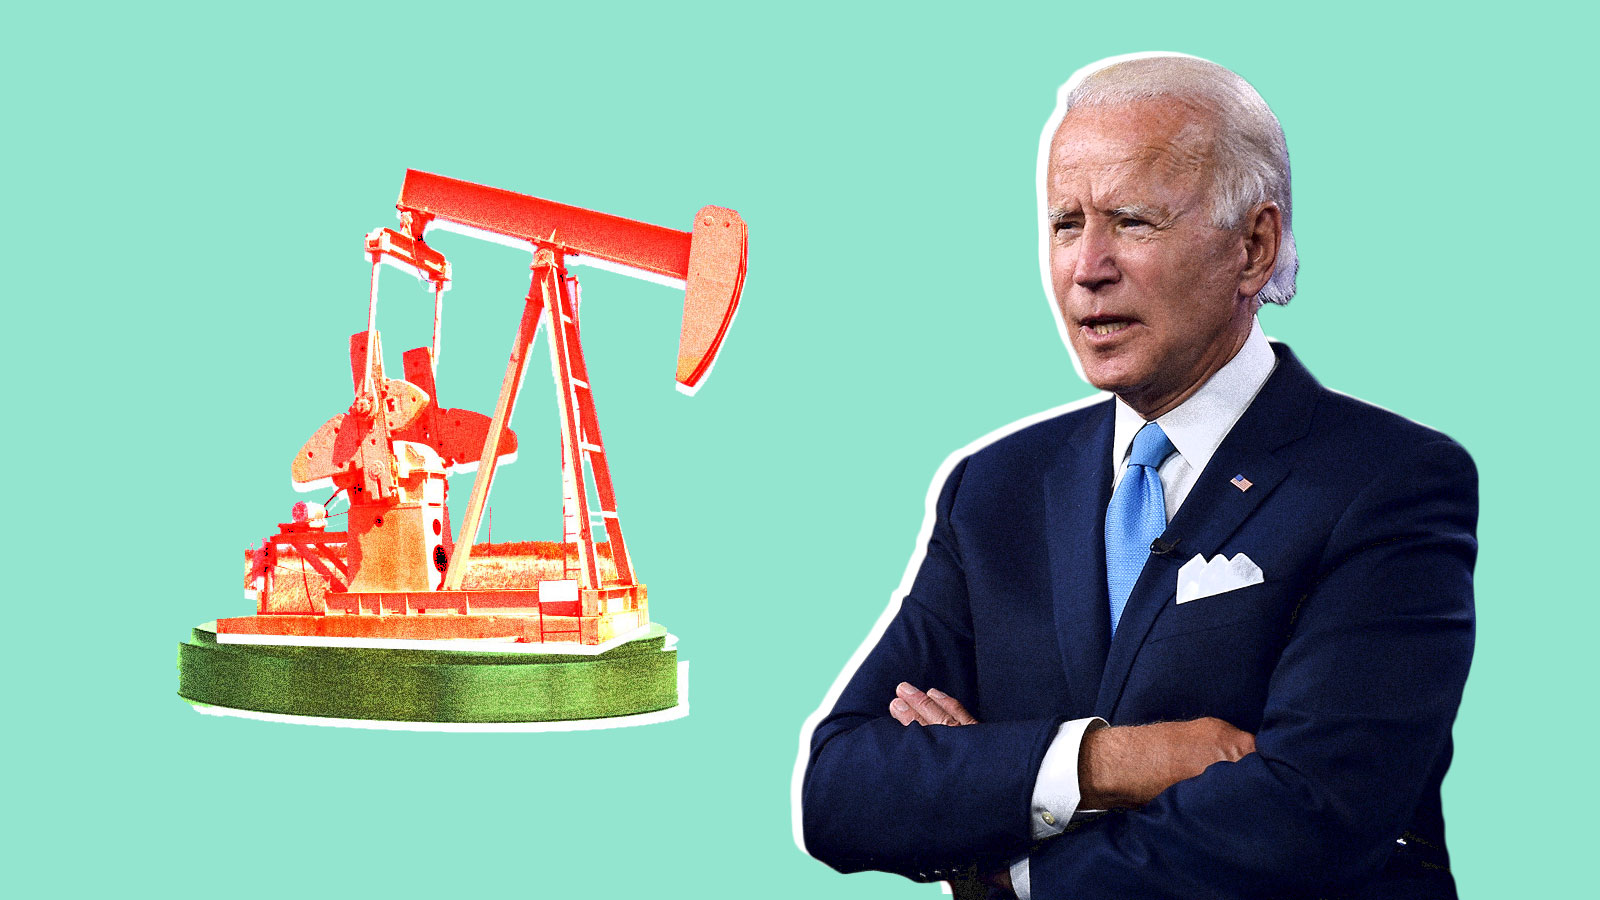 Joe Biden stands in a collage next to an oil pumpjack to represent oil and fracking.